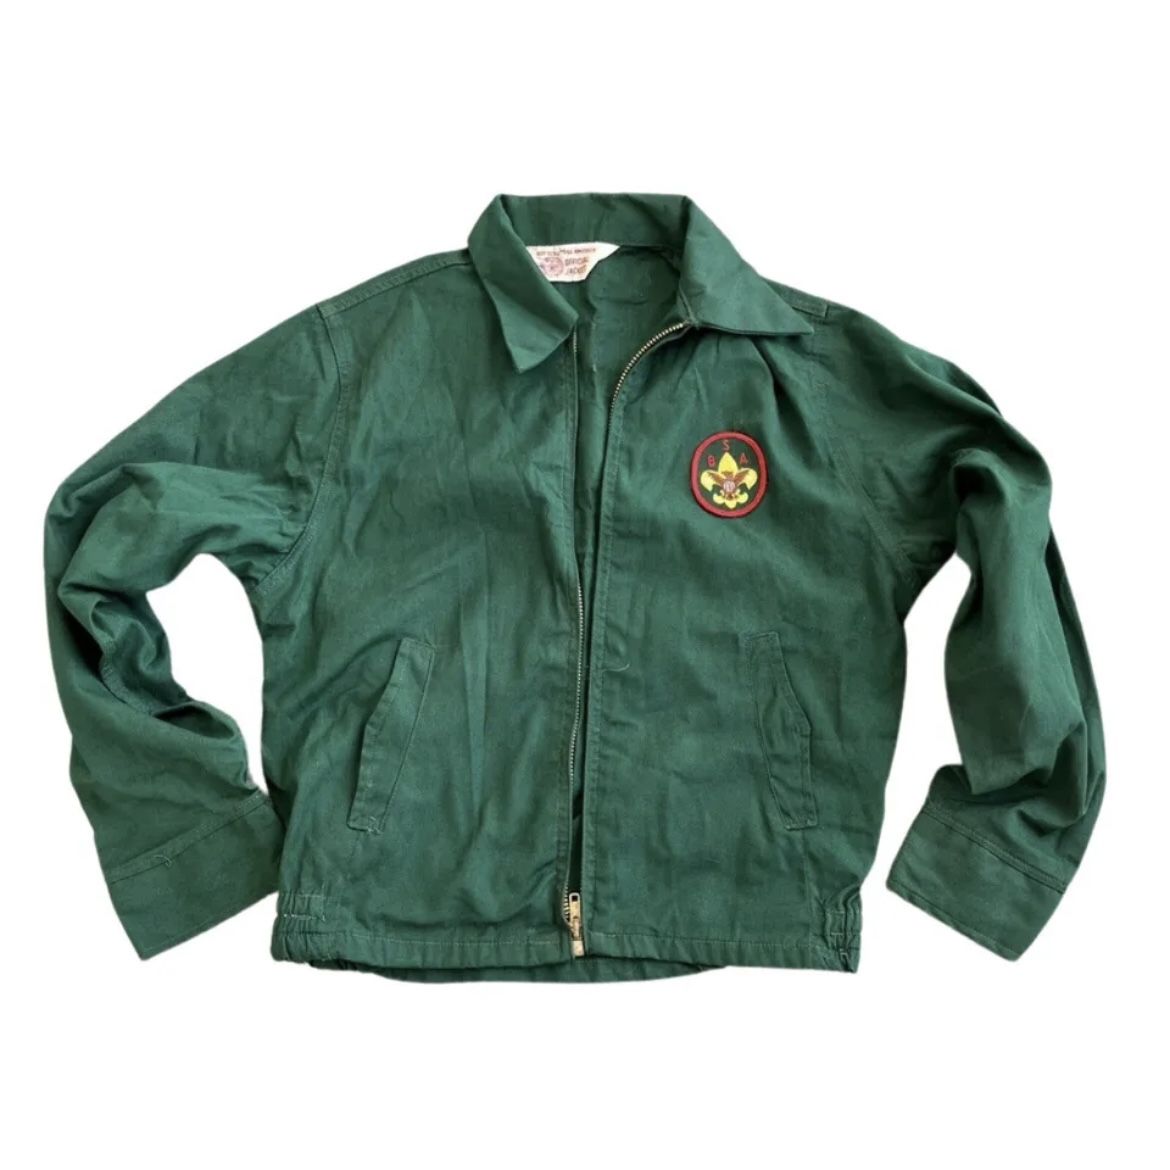 Vintage Boy Scouts Of America Jacket Official Jacket + Patches